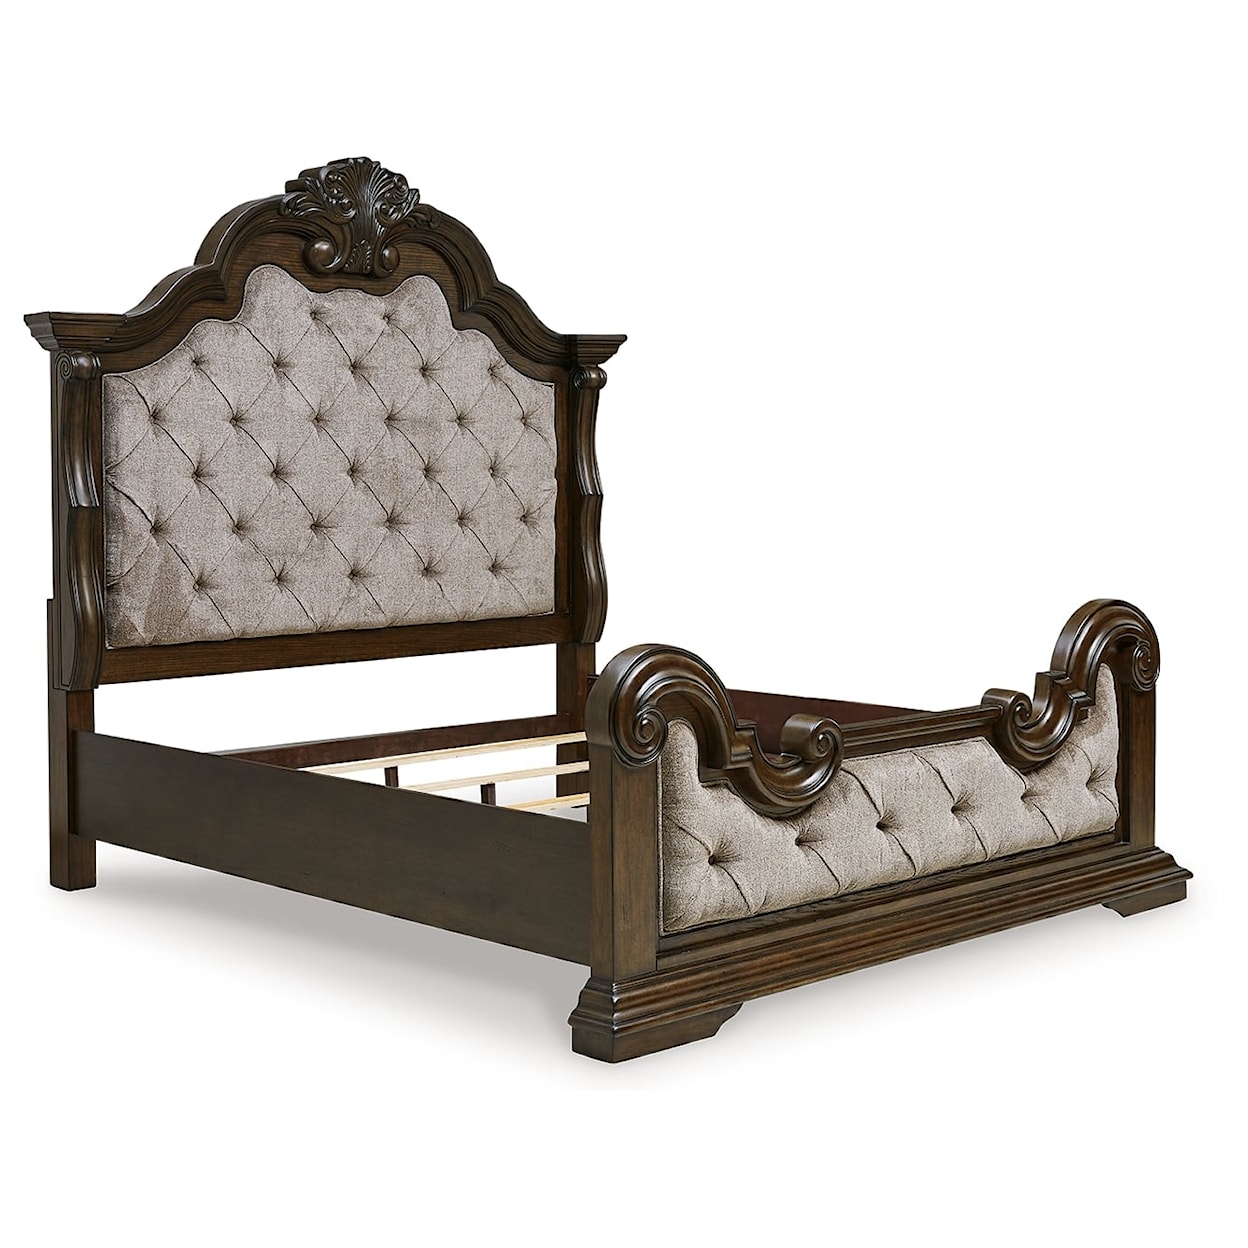 Signature Maylee California King Upholstered Bed